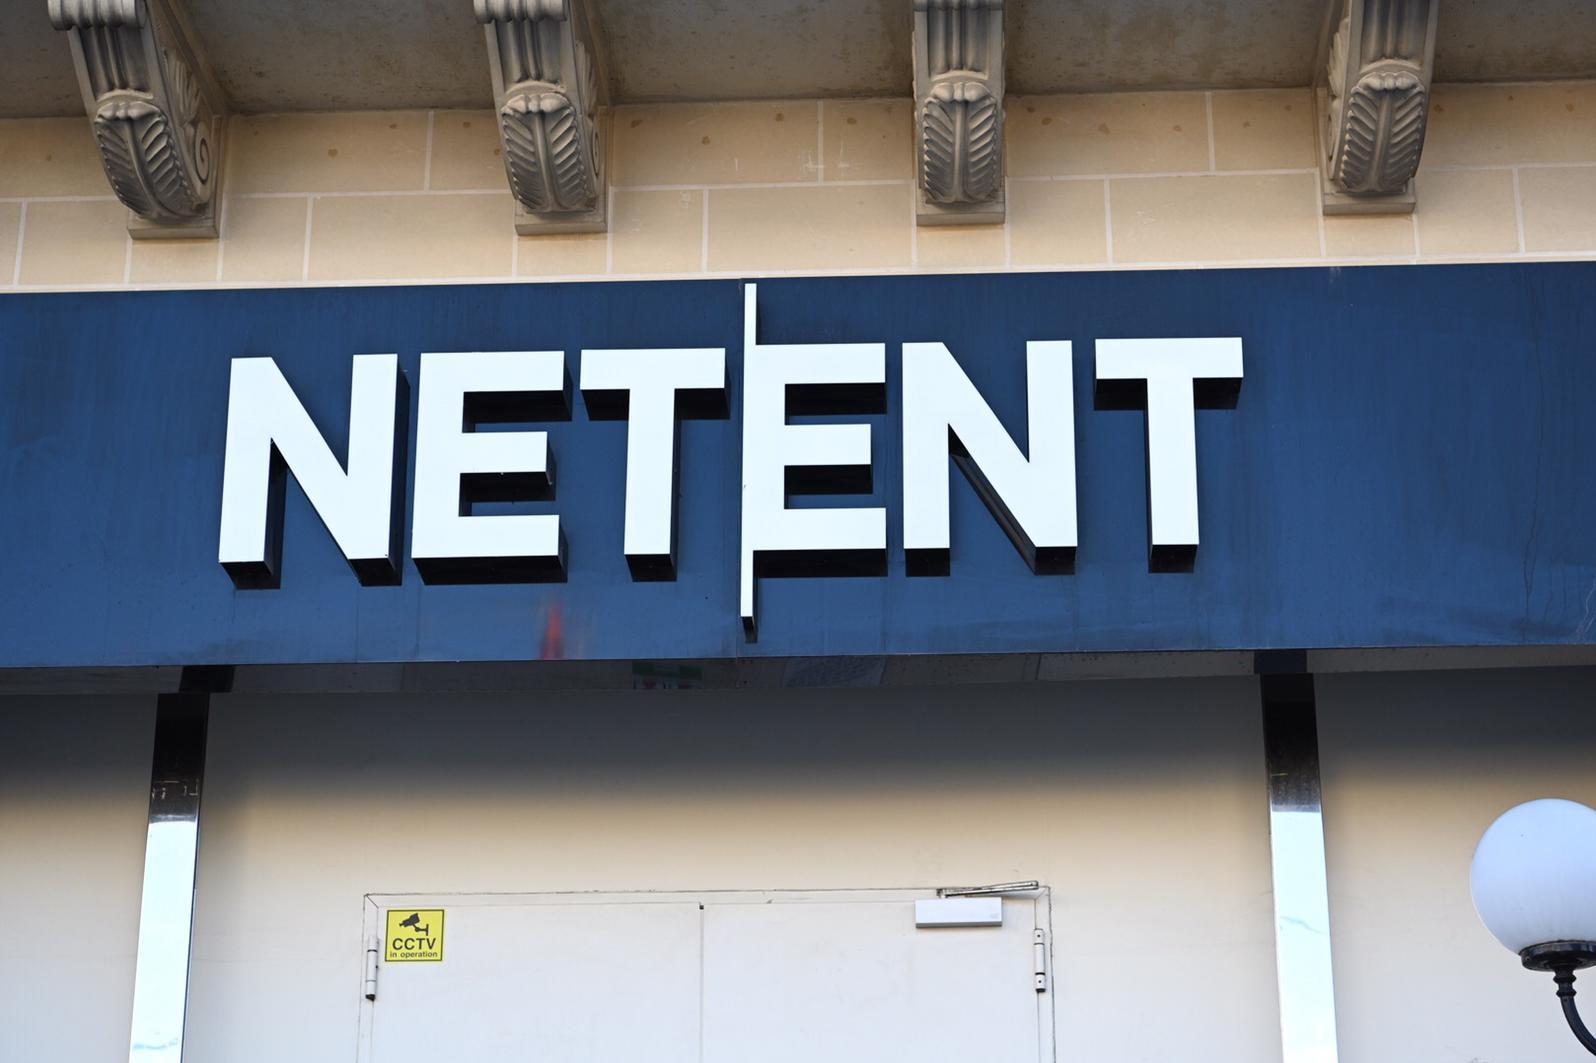 Malta Court Took Sides of Trade Union and Kept NetEnt Layoffs Postponed